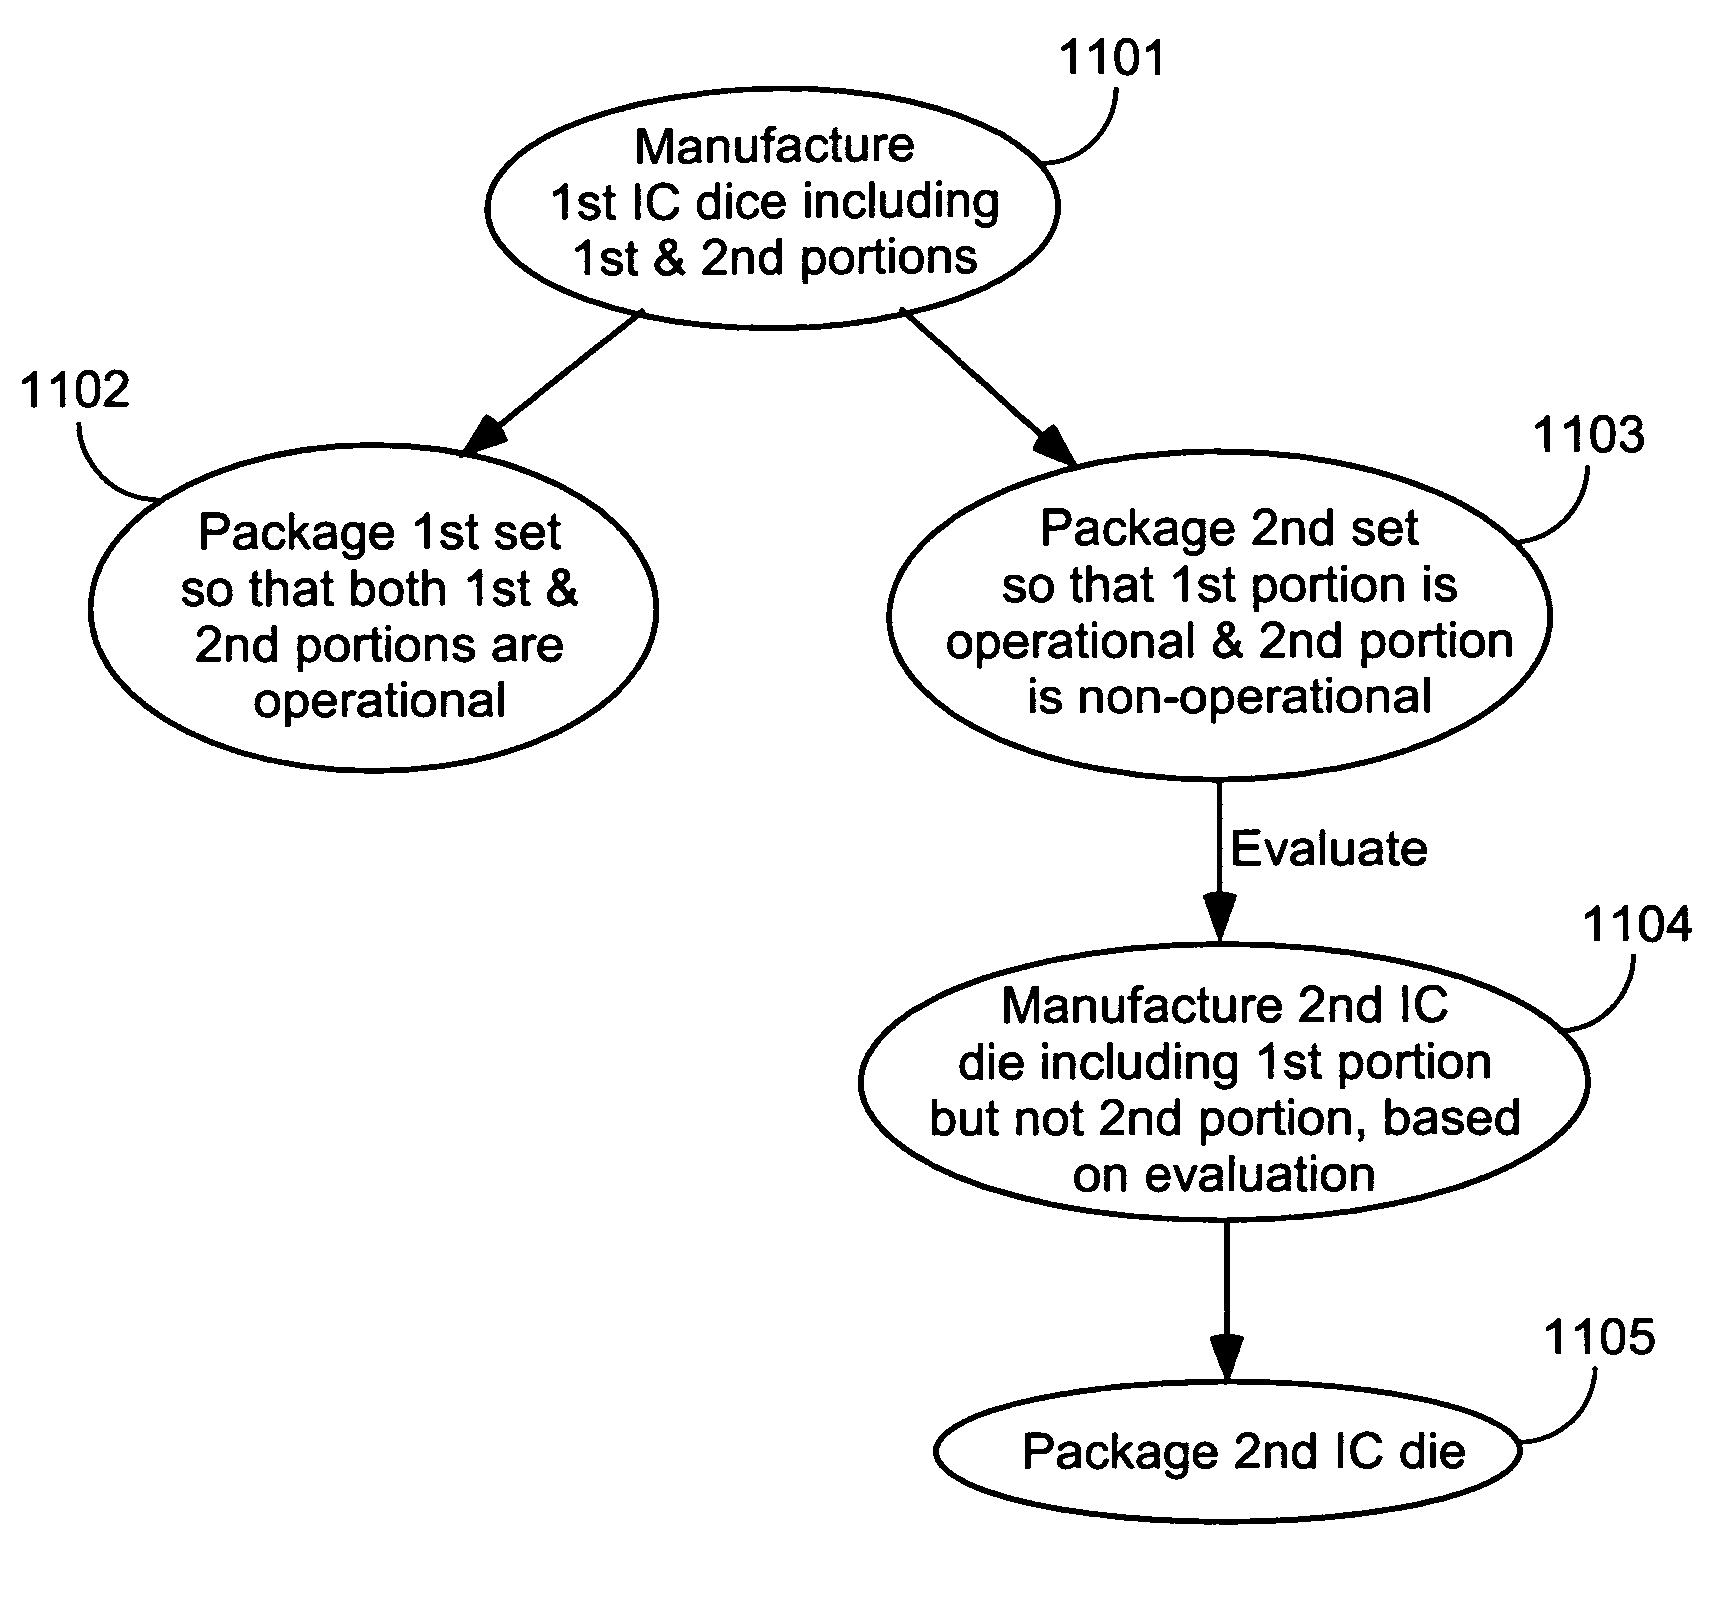 Methods of providing a family of related integrated circuits of different sizes